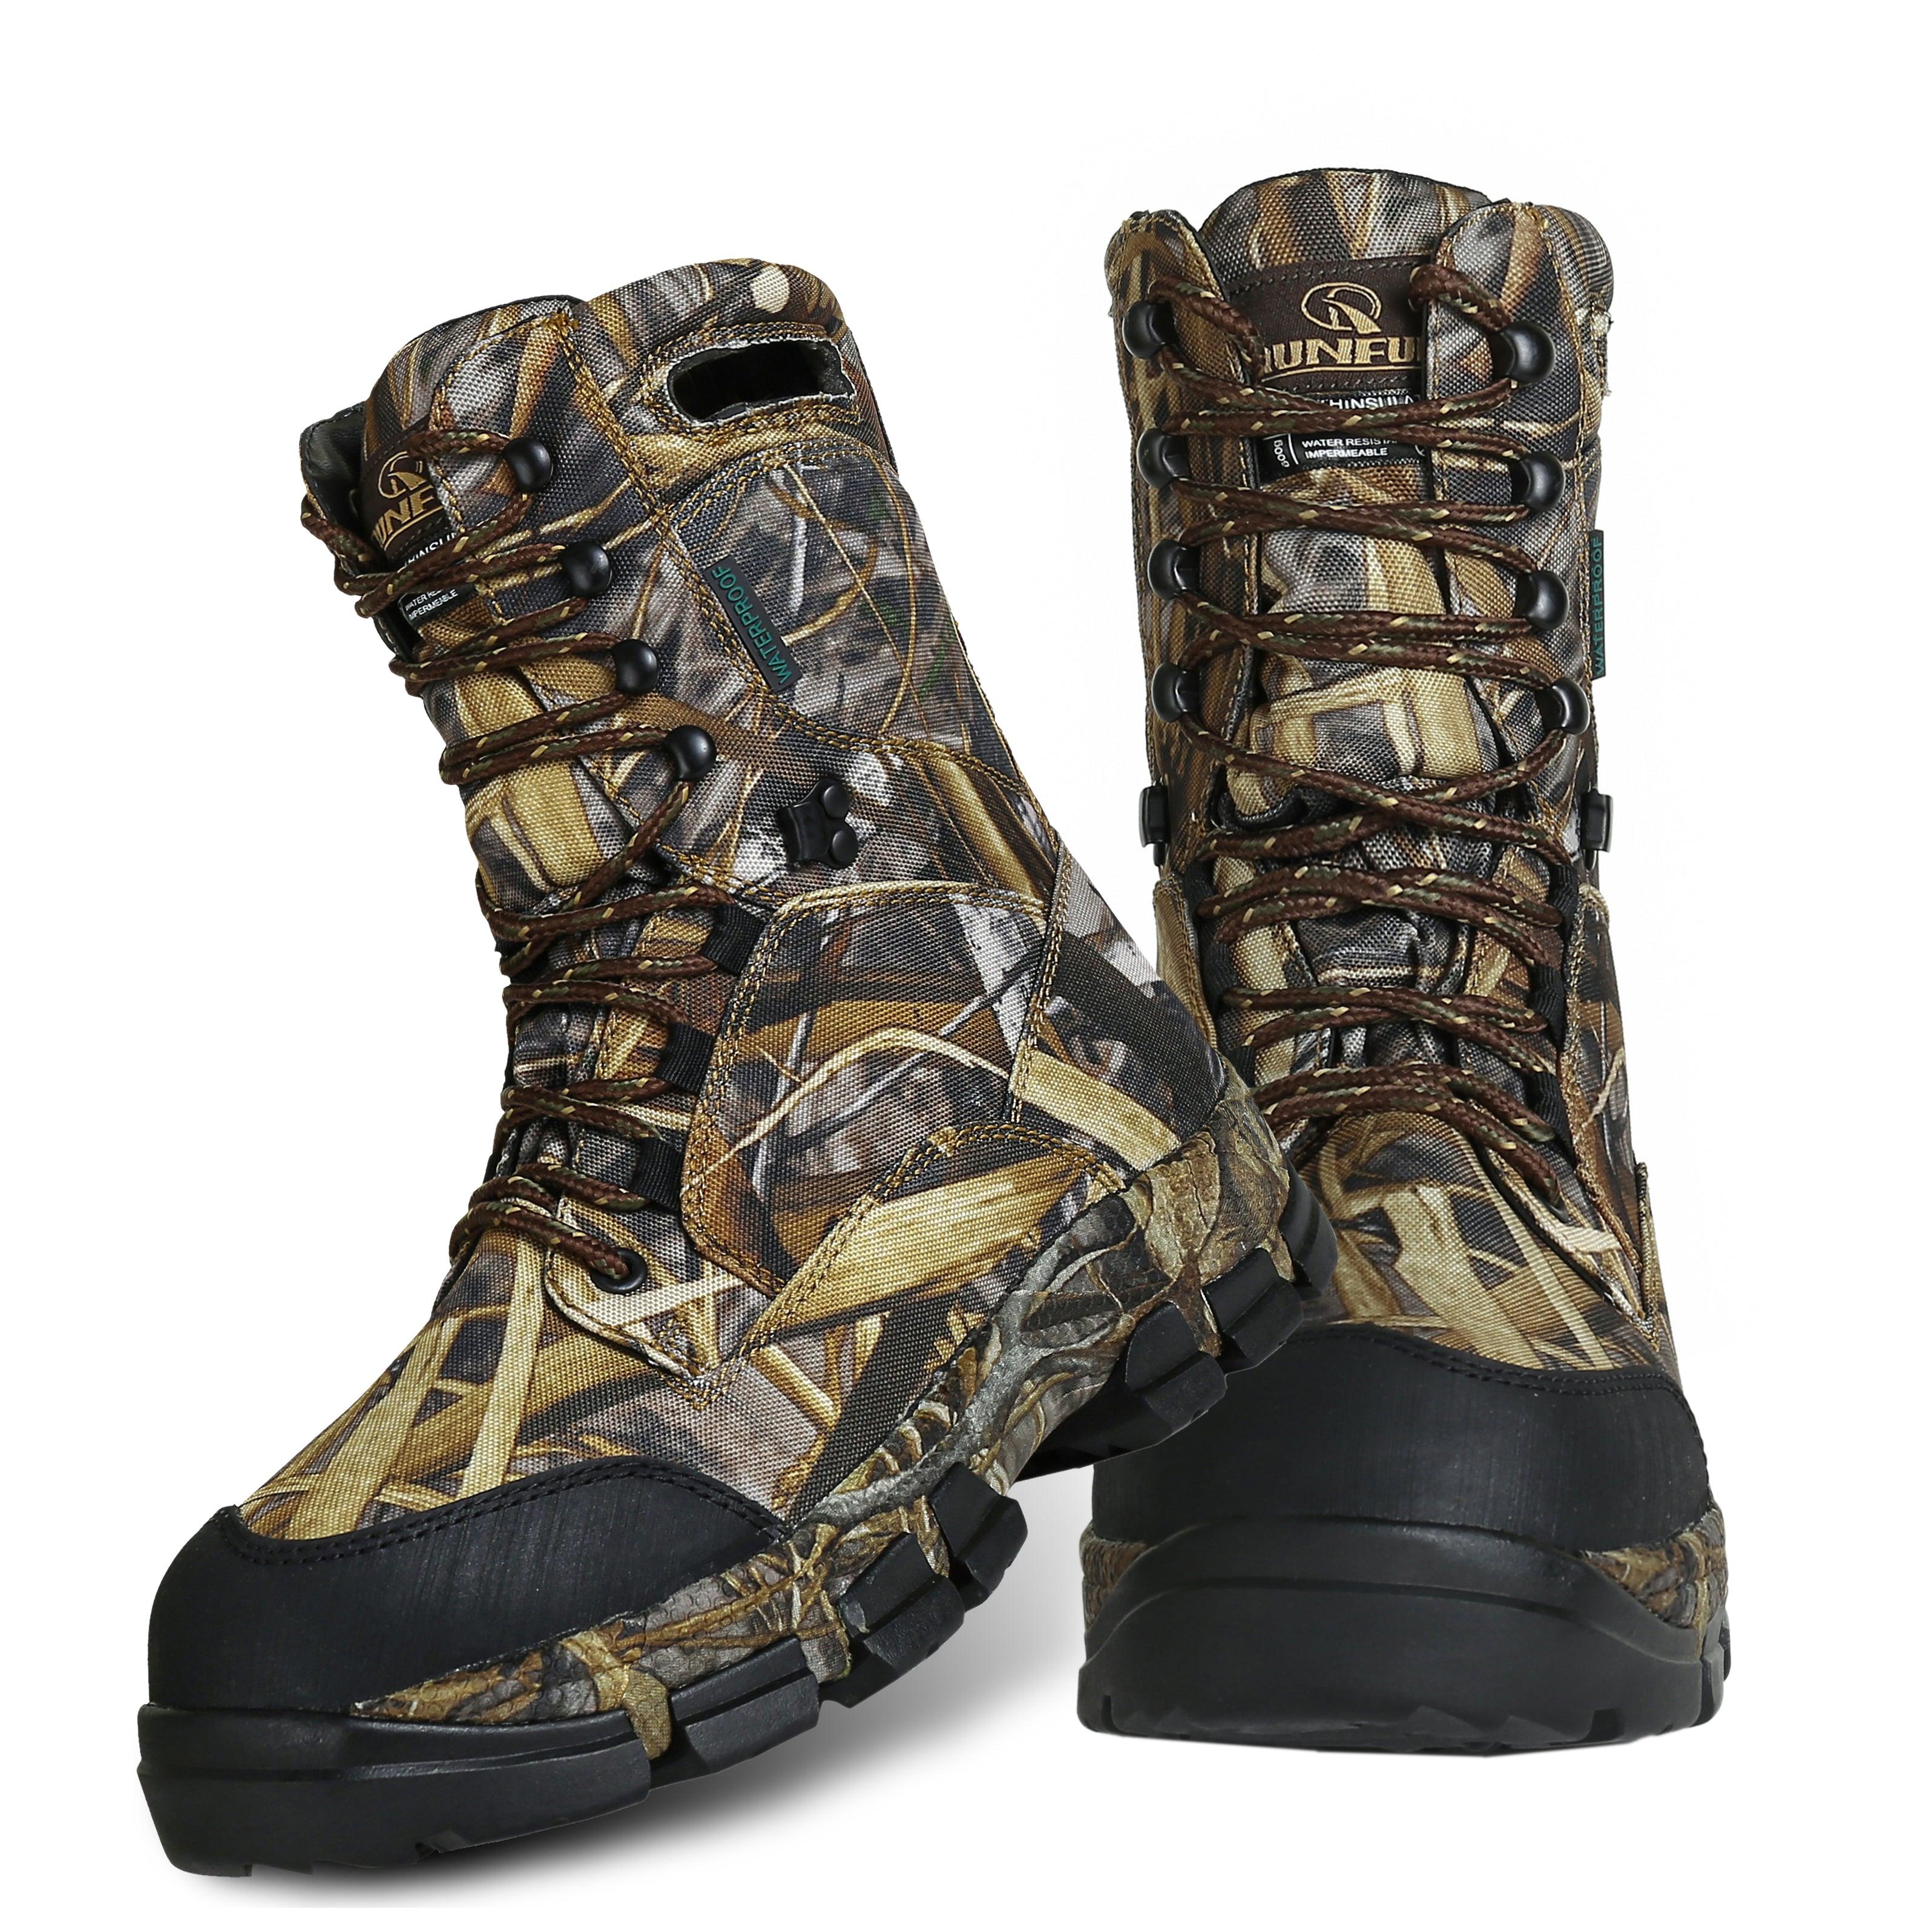 RUNFUN 10'' Men's Waterproof Warmest Camo Lace Up Hunting Boots Shoes With Holes For Easy On And Off RF013 - Runfun Footwear